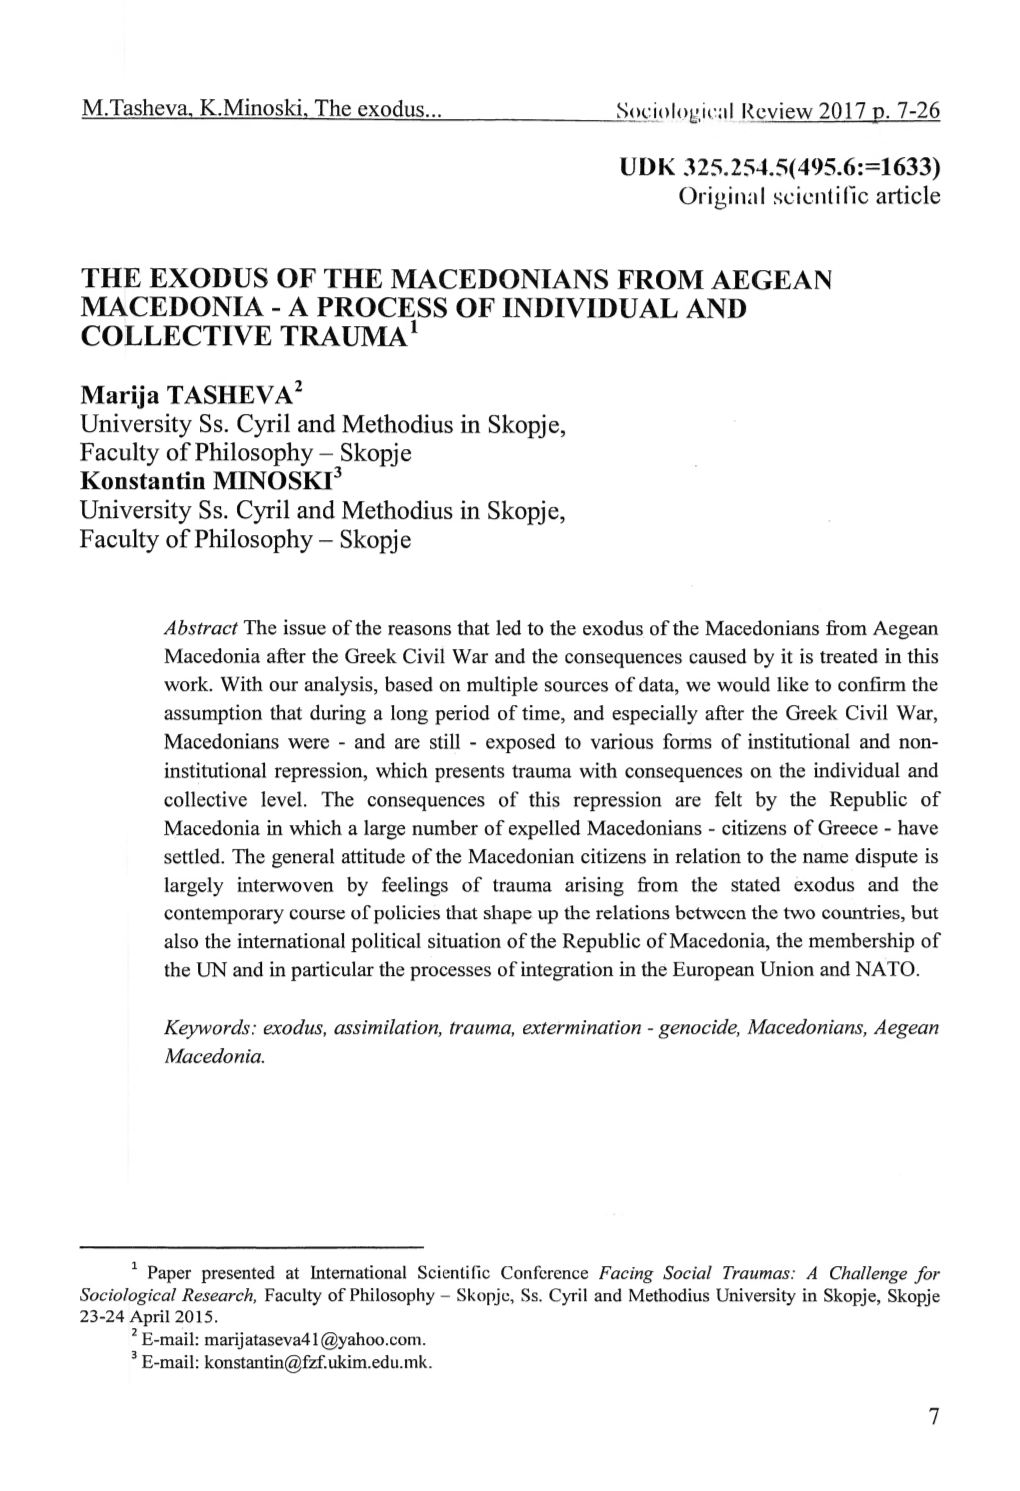 The Exodus of the Macedonians from Aegean Macedonia - a Process of Individual and Collective Trauma1